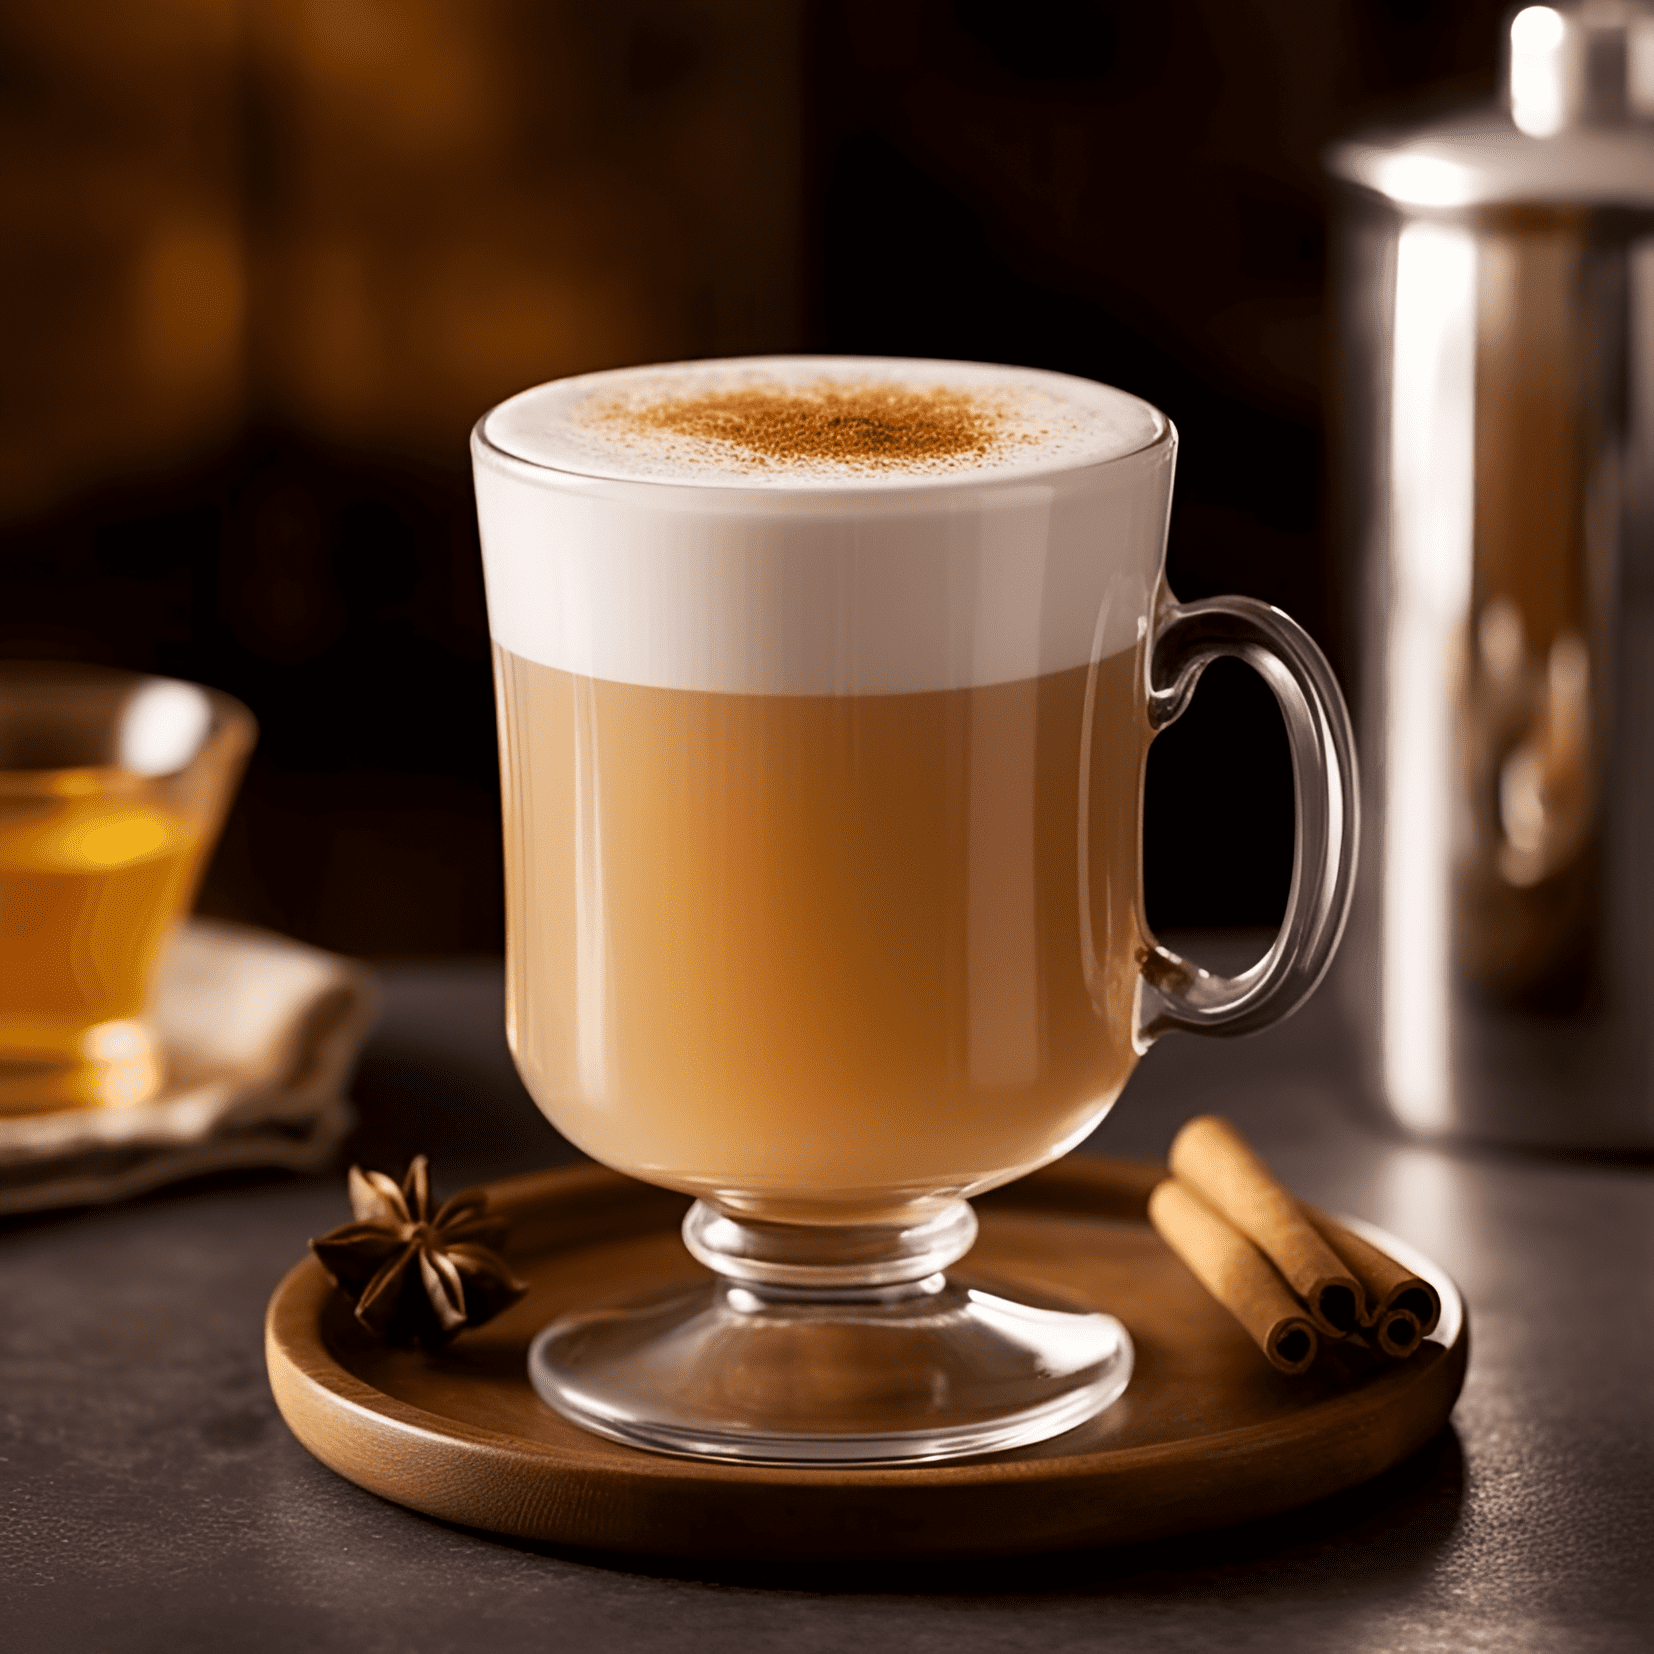 London Fog Cocktail Recipe - The London Fog cocktail is a delightful blend of sweet, creamy, and slightly citrusy flavors. The Earl Grey tea provides a subtle, floral undertone, while the addition of vanilla and lavender syrup adds a touch of sweetness. The steamed milk gives it a rich, velvety texture, making it a perfect drink for a cozy evening.